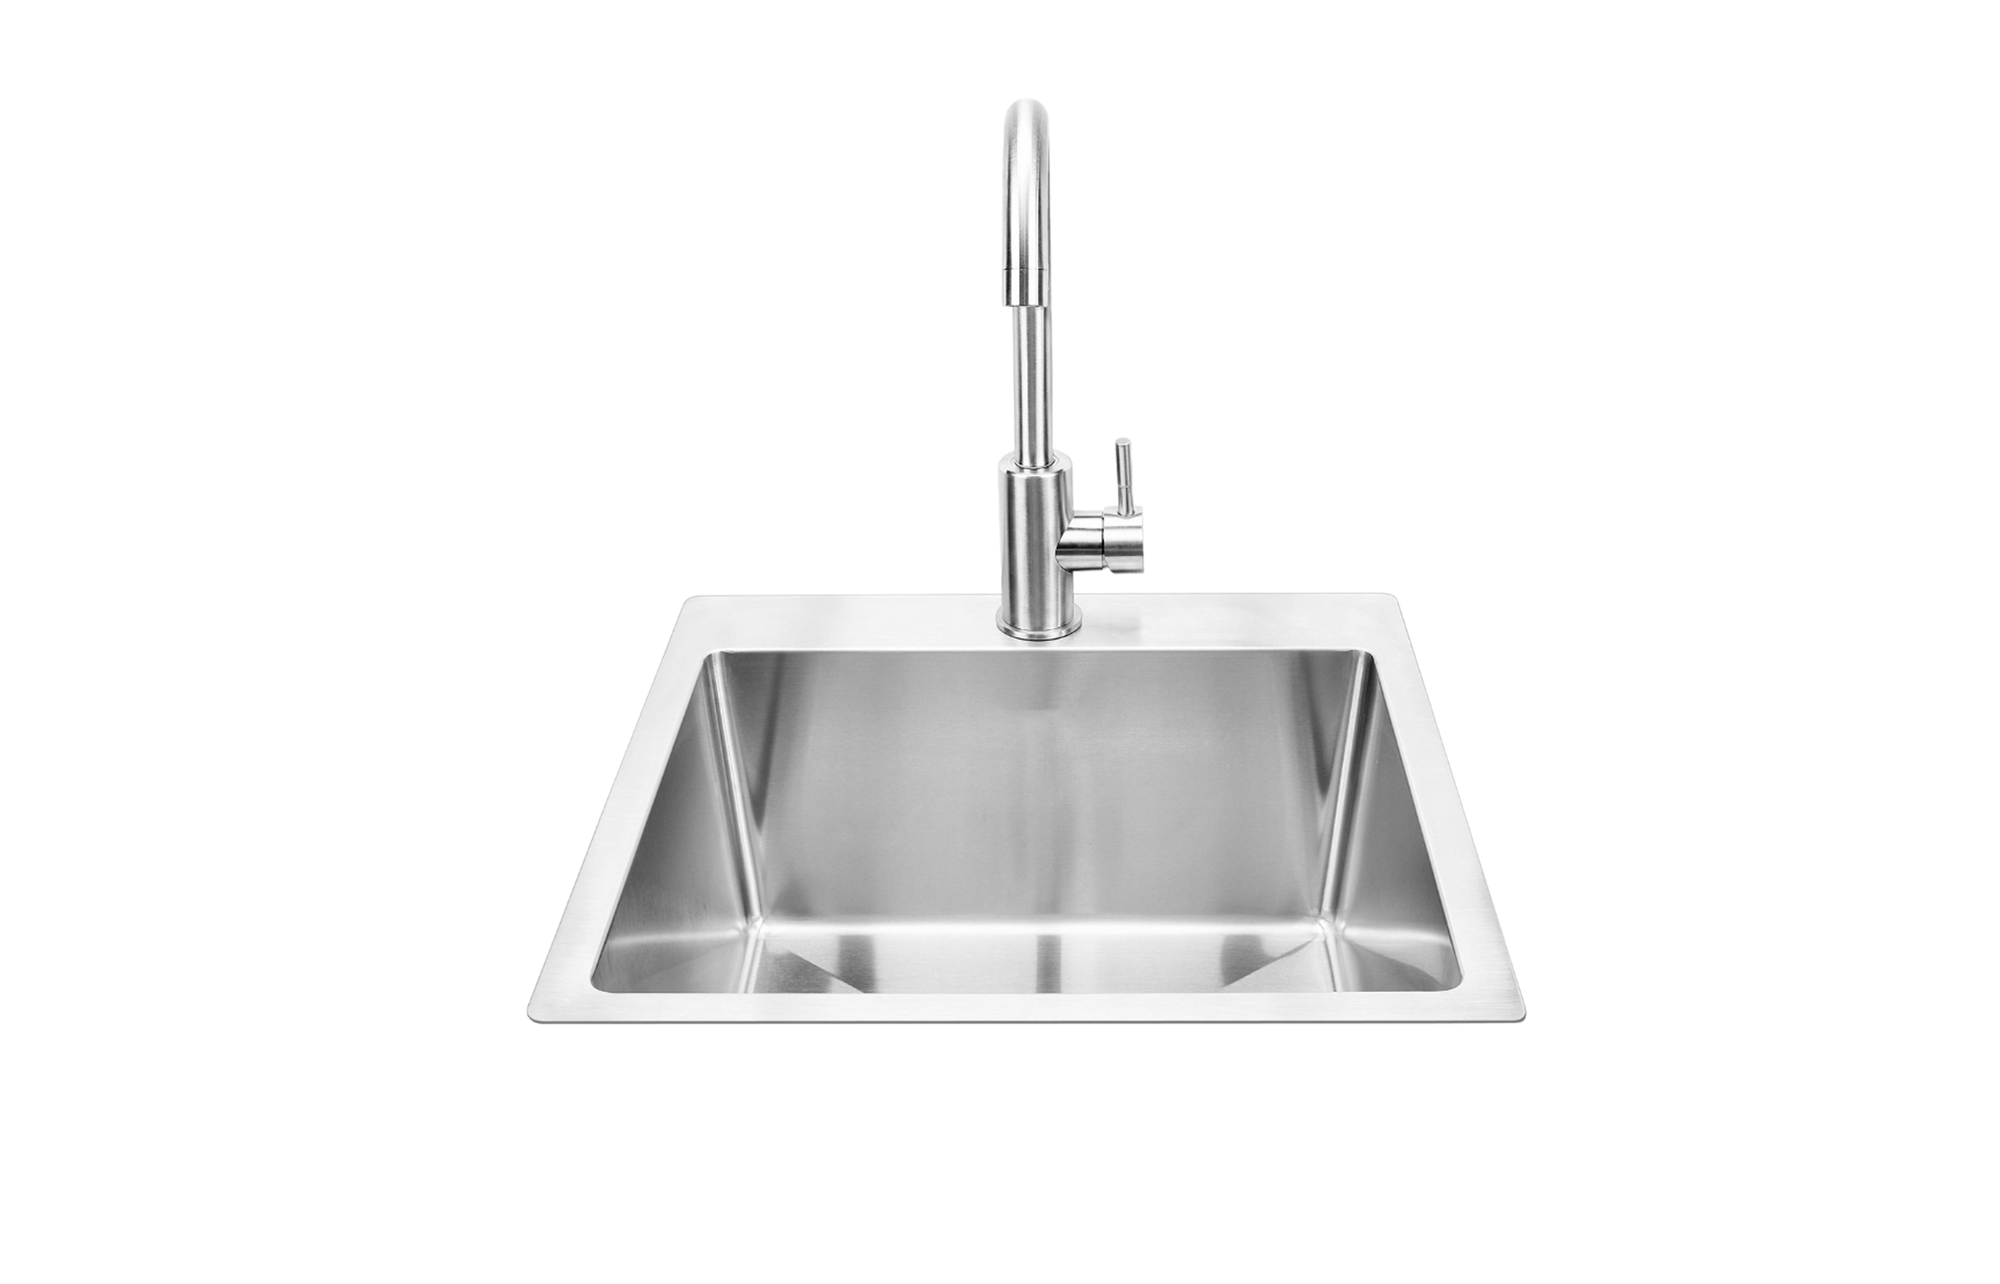 Bull Premium Sink - 304 Stainless Steel, Outdoor Kitchen Sink with Faucet and Strainer